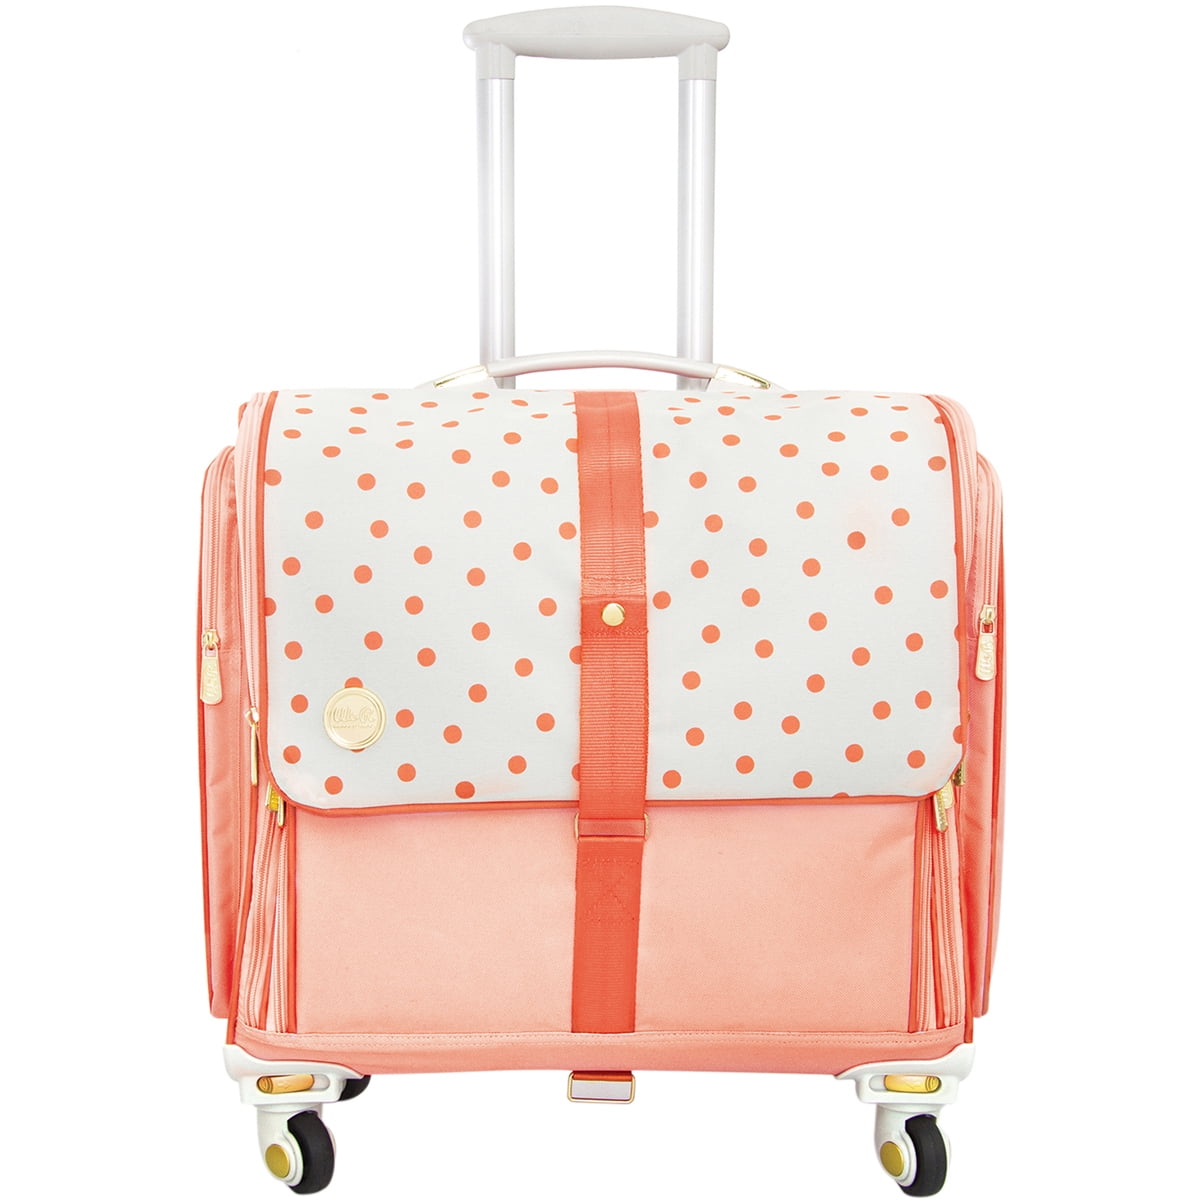 360 Crafter's Rolling Bag-Blush Dot, Pk 1, We R Memory Keepers